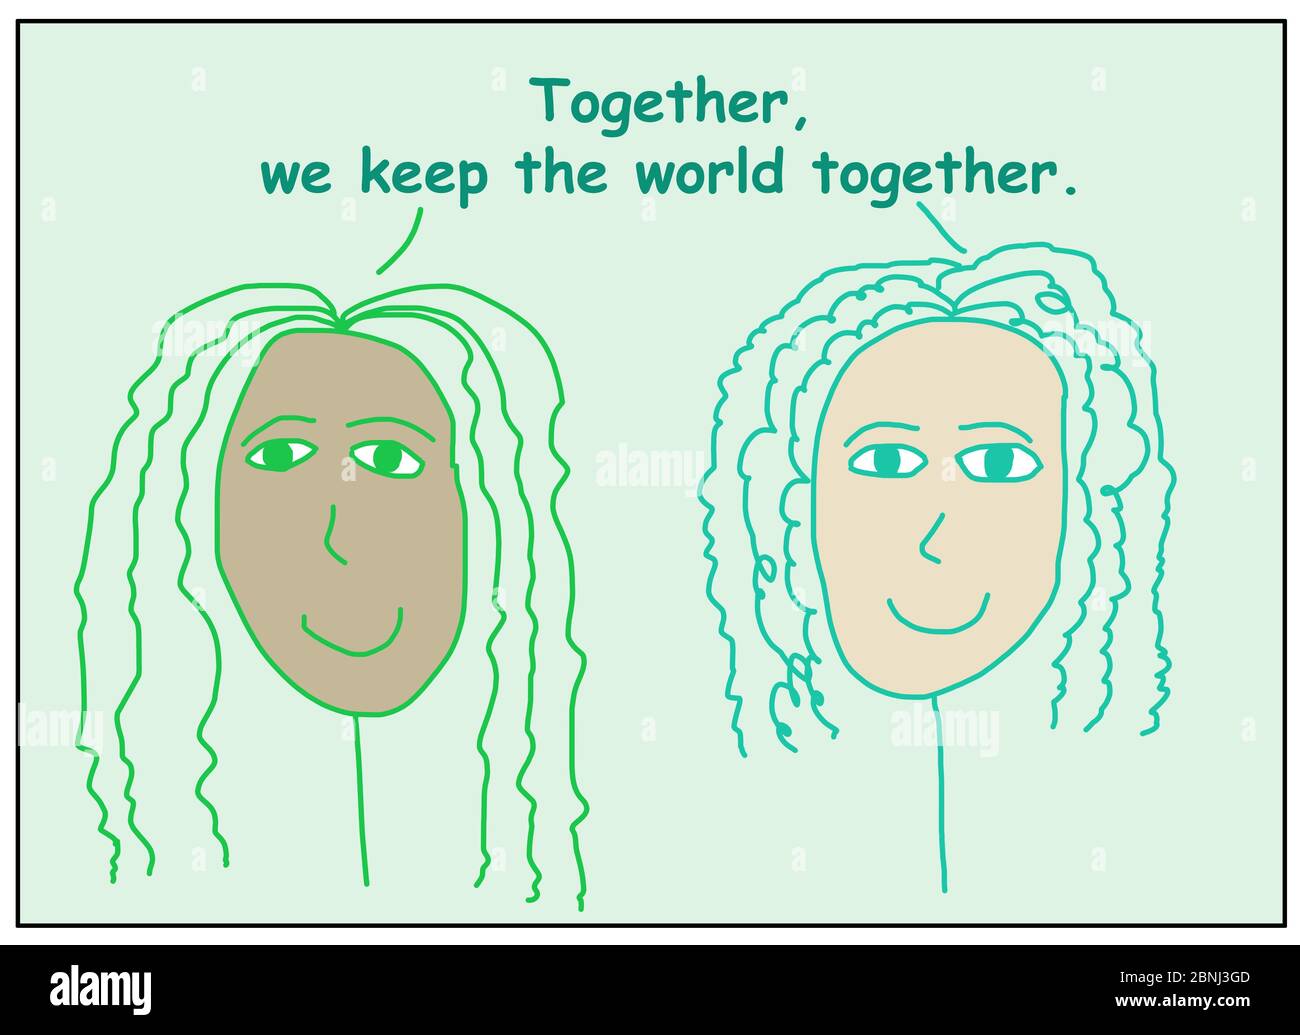 Color cartoon of two smiling and ethnically diverse women saying that together, we keep the world together. Stock Photo